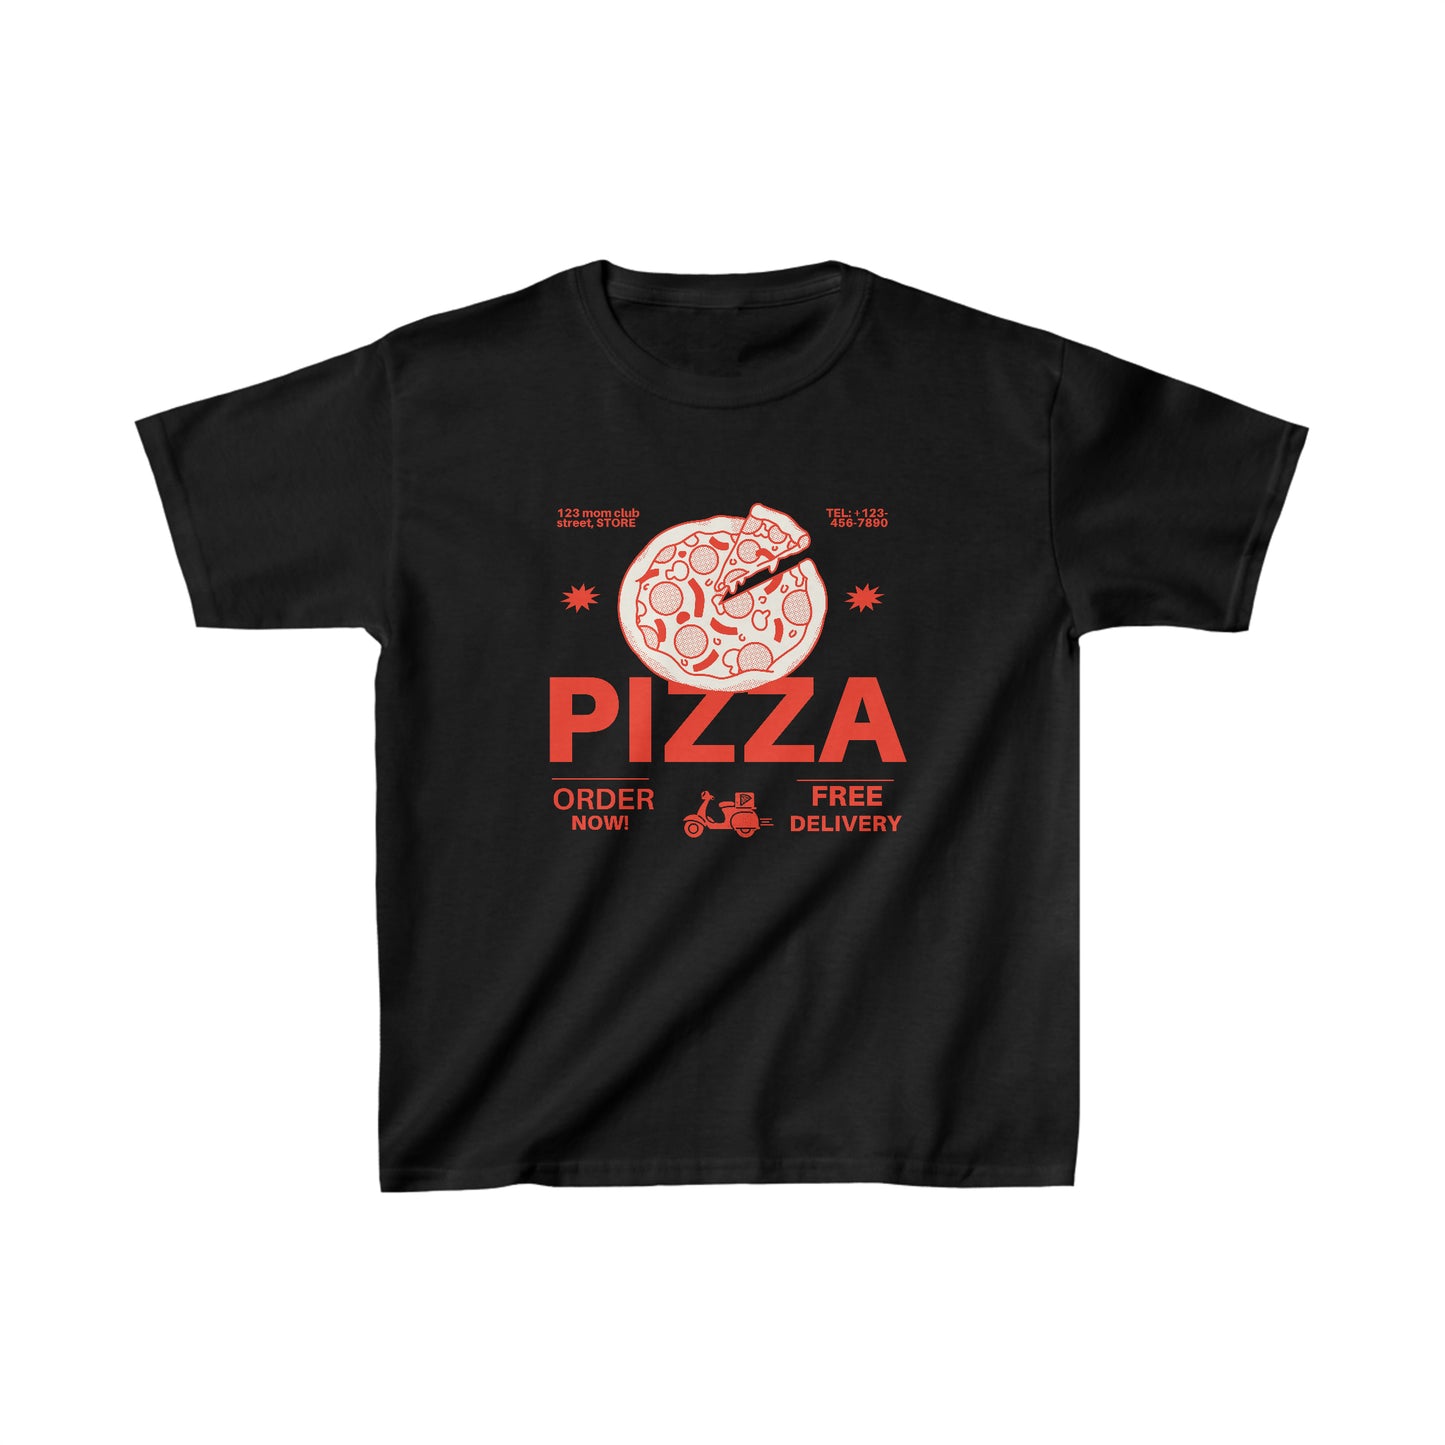 English PIZZA DELIVERY t-shirt - child